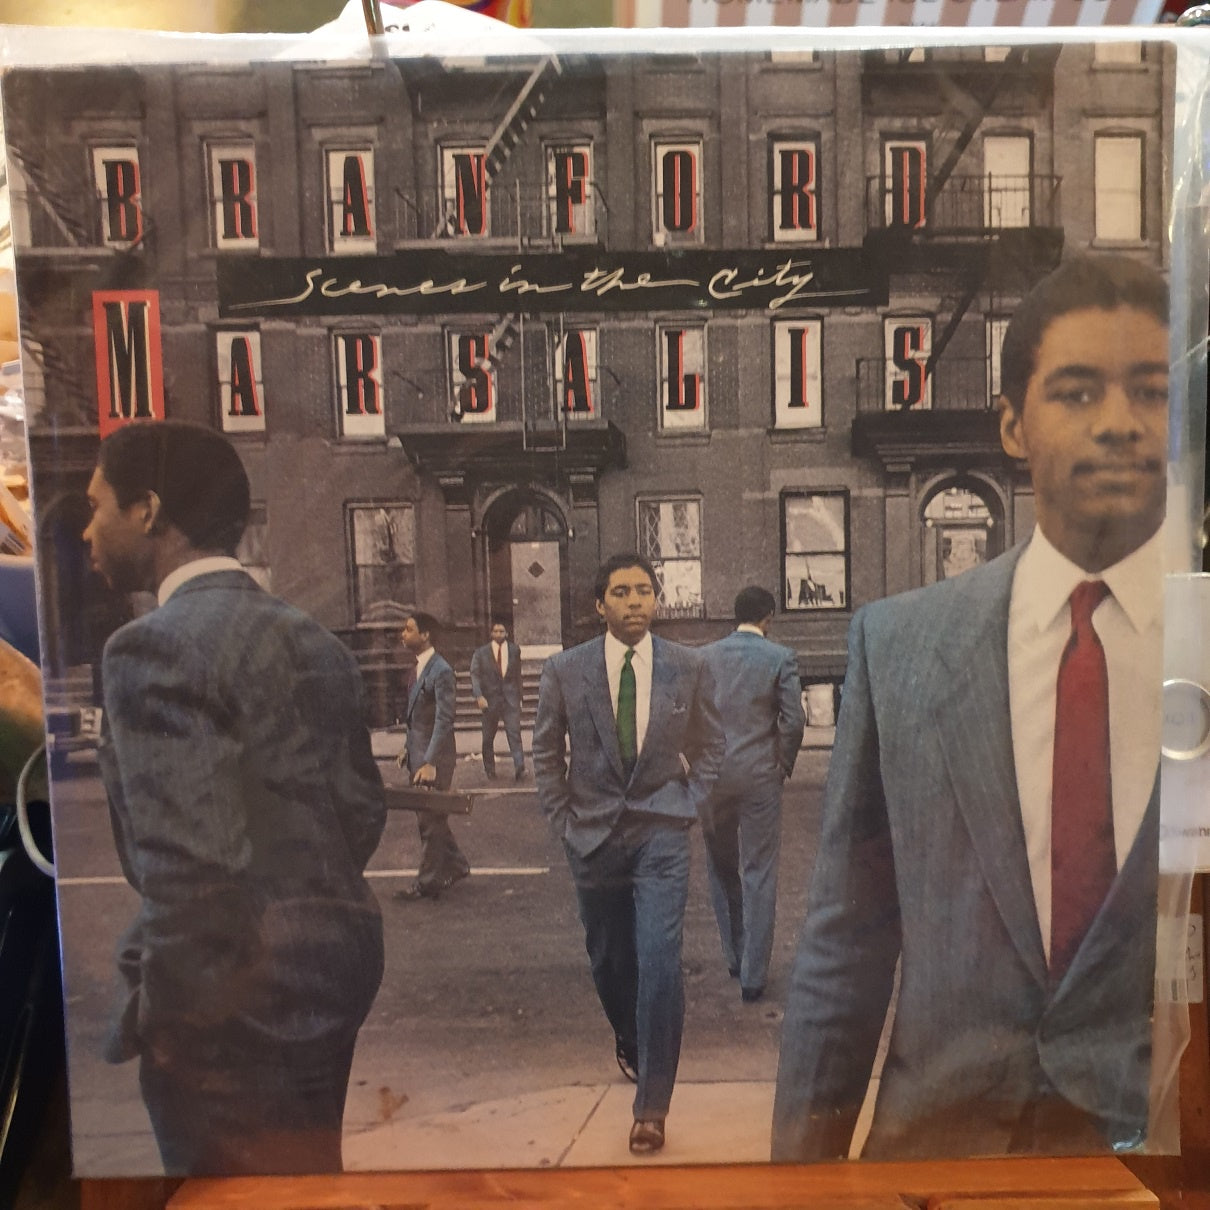 Second Hand - Branford Marsalis, Scenes in the City LP (2nd Hand)